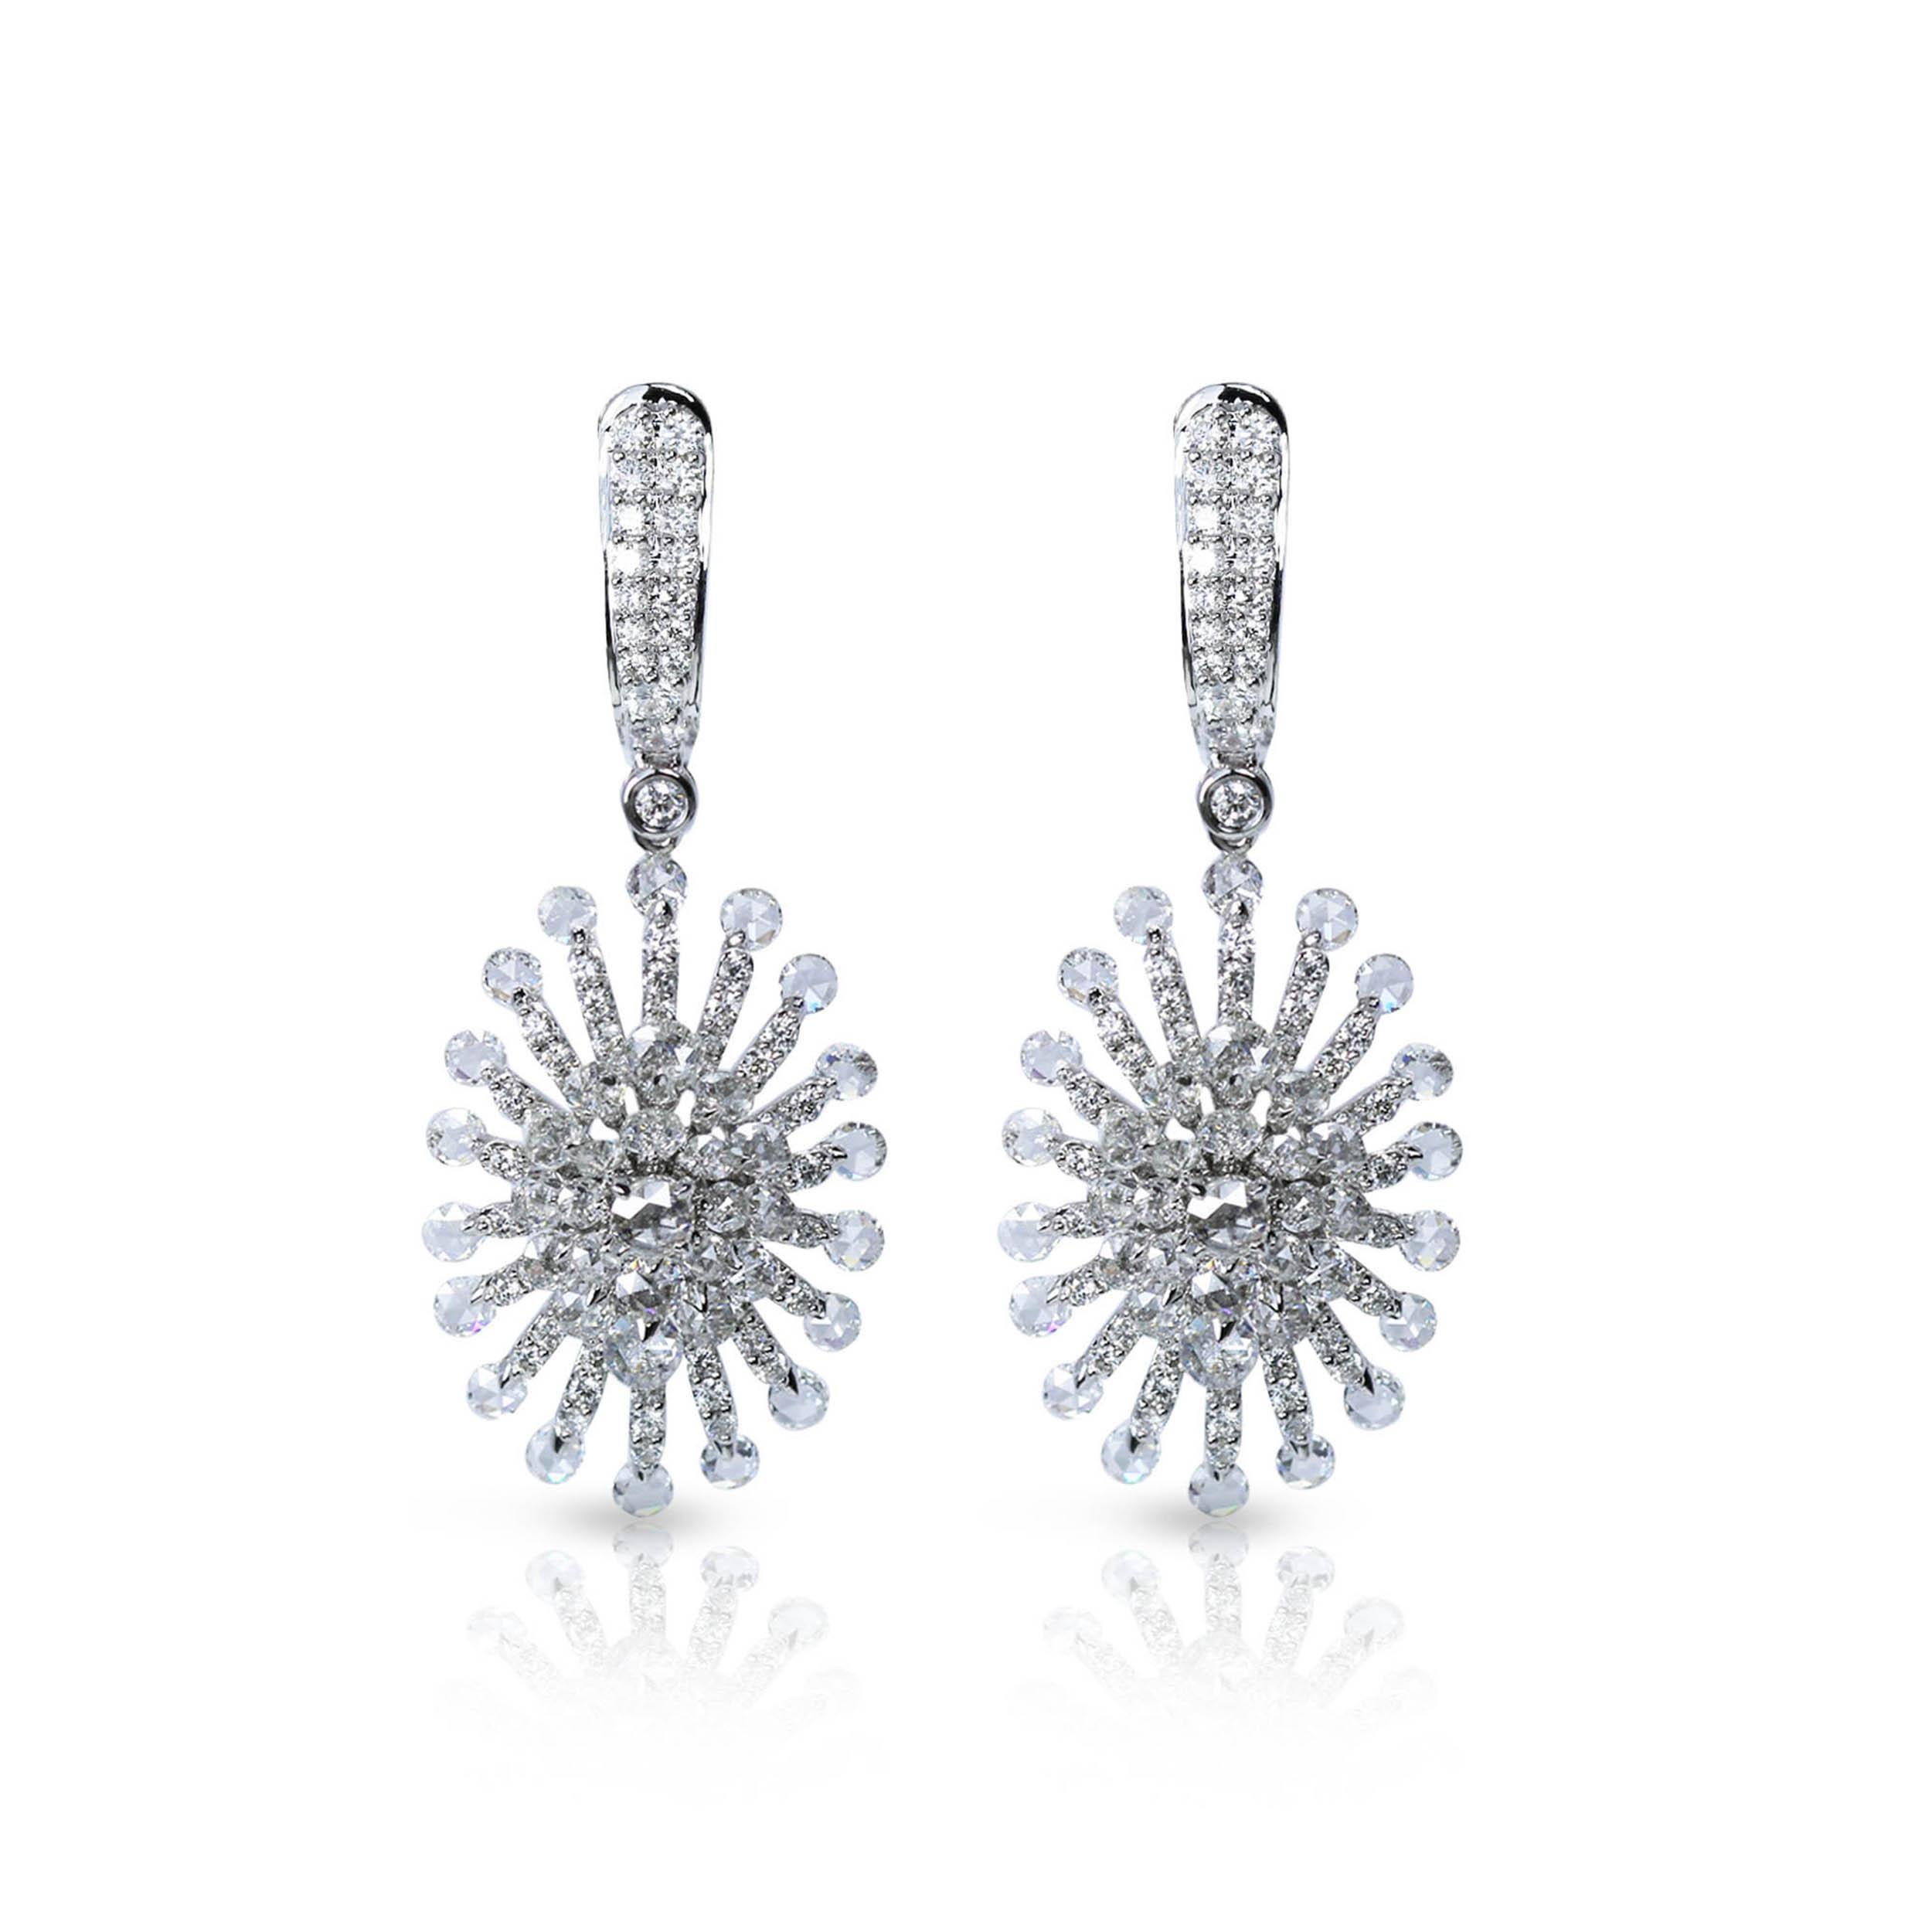 Diamond earrings

The power of the sun and its essence is carefully captured in this pair of earrings crafted using 18K white gold and studded with round rosecut and round brilliant cut diamonds set in a pave and drill setting. Don this captivating